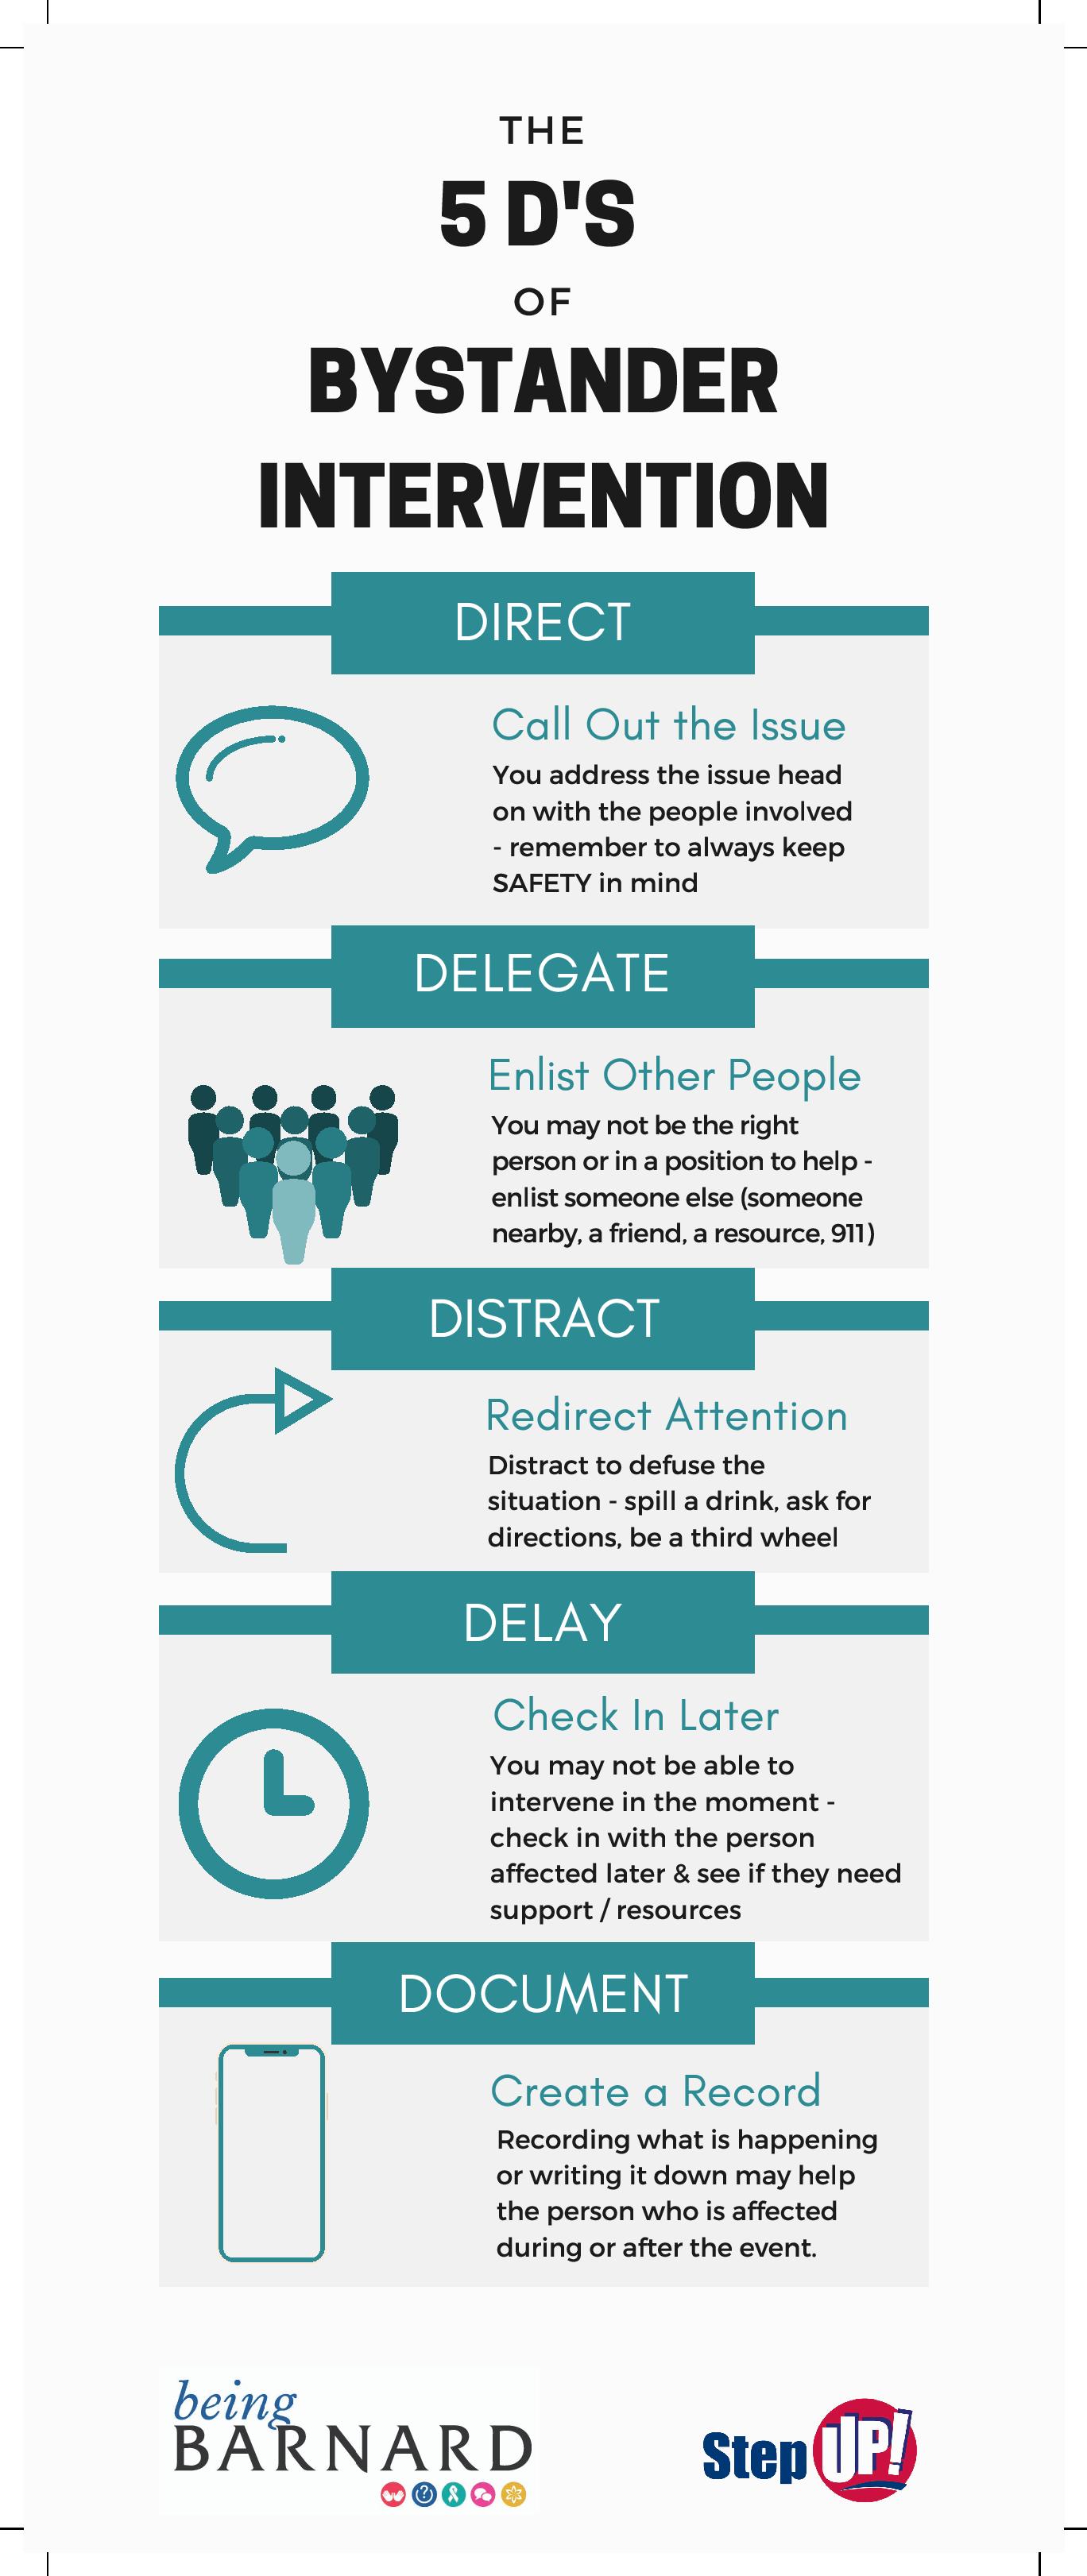 Blue and White chart showing the 5 ways of intervening - Direct, Delegate, Distract, Delay, Document